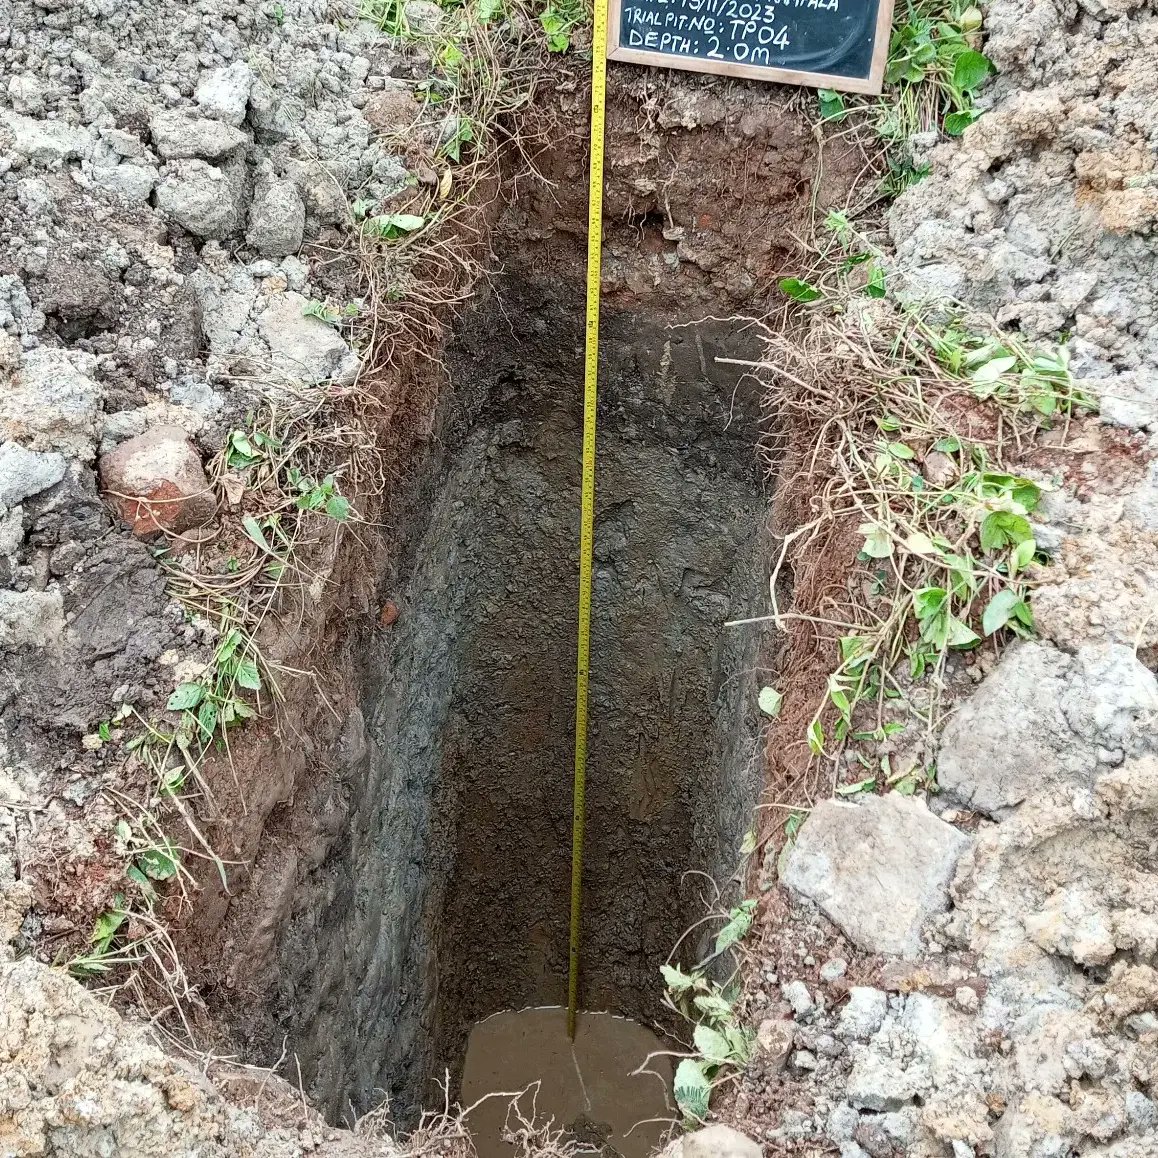 We choose the No. of #trial pits depending on the #design of your construction to ensure thorough coverage of the #site and accurate representation of #soil_conditions. Have geotechnical needs? Call us on: +256770836731 @oresoil_uganda #construction #architecture #design #test